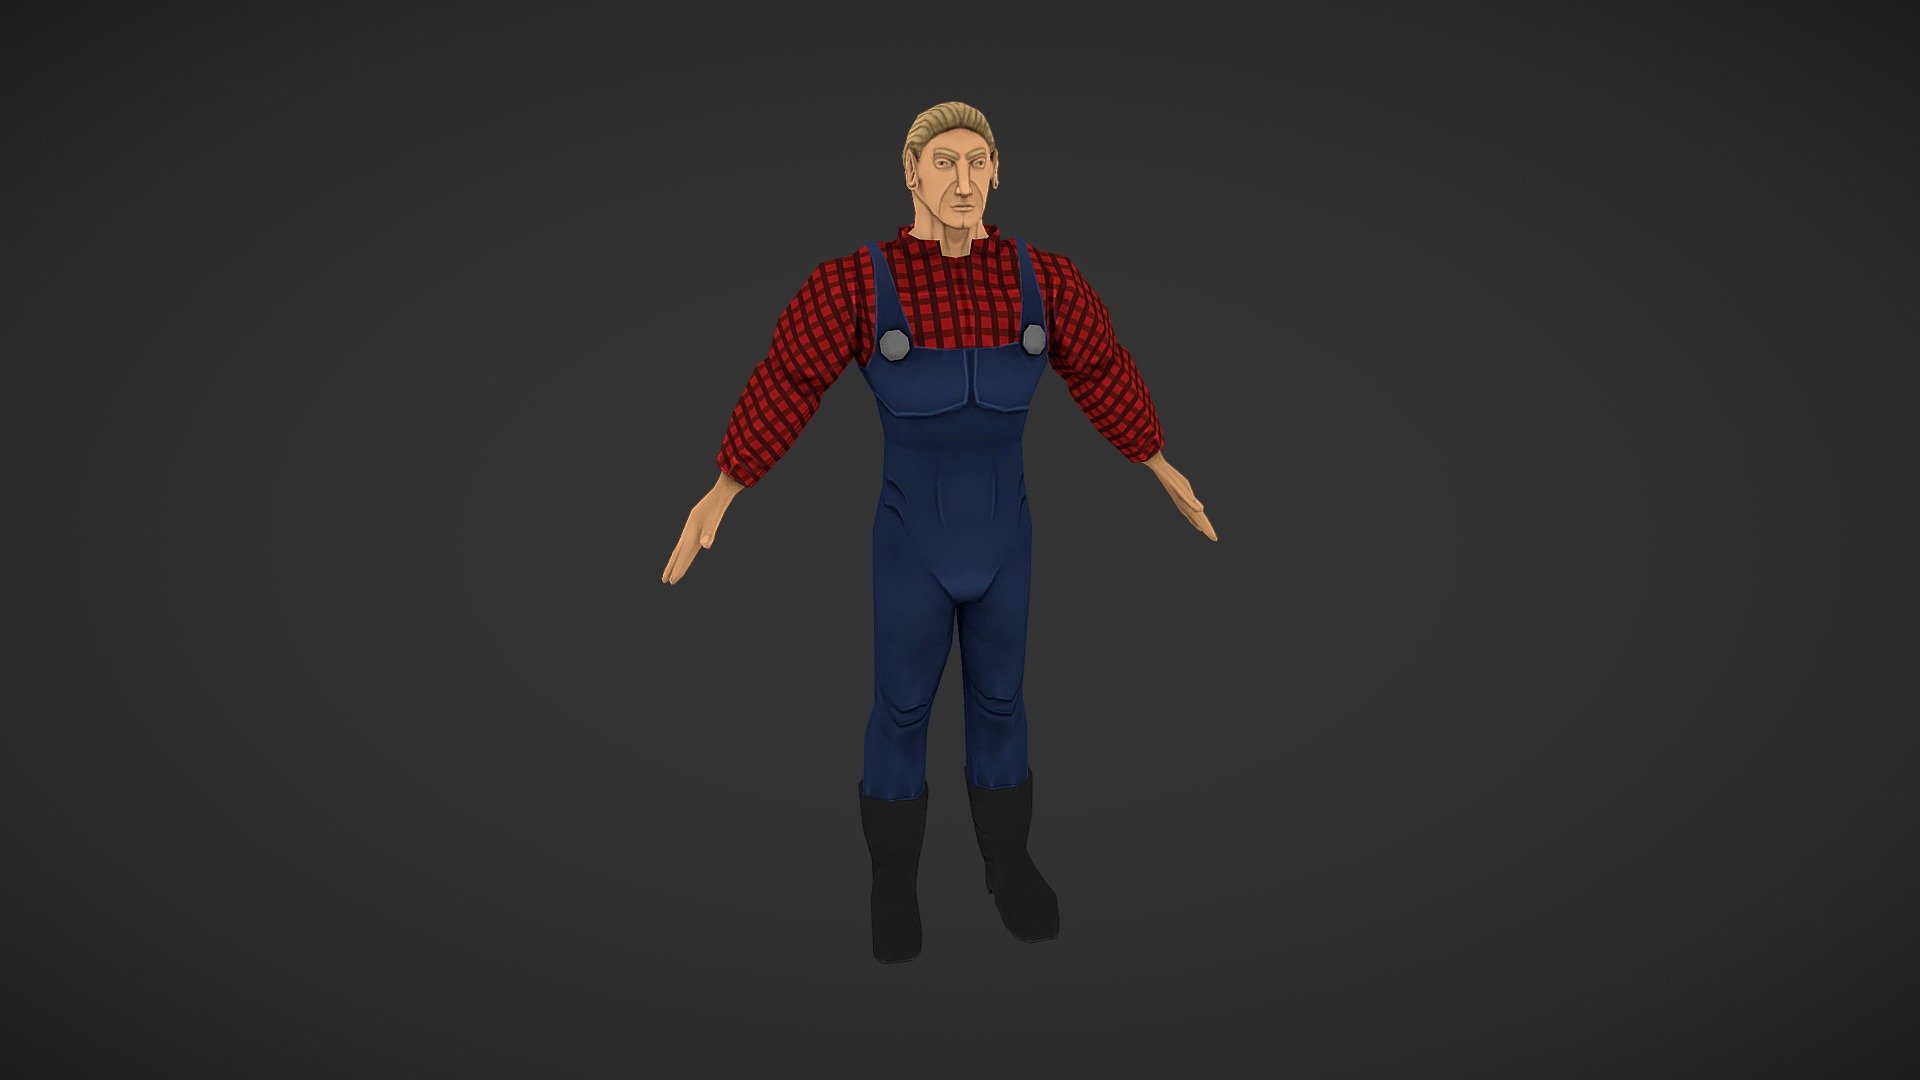 Stylized farmer made to fit into the idea of a low poly game character. I'll probably make around two more characters with similar focus on specific roles 3d model